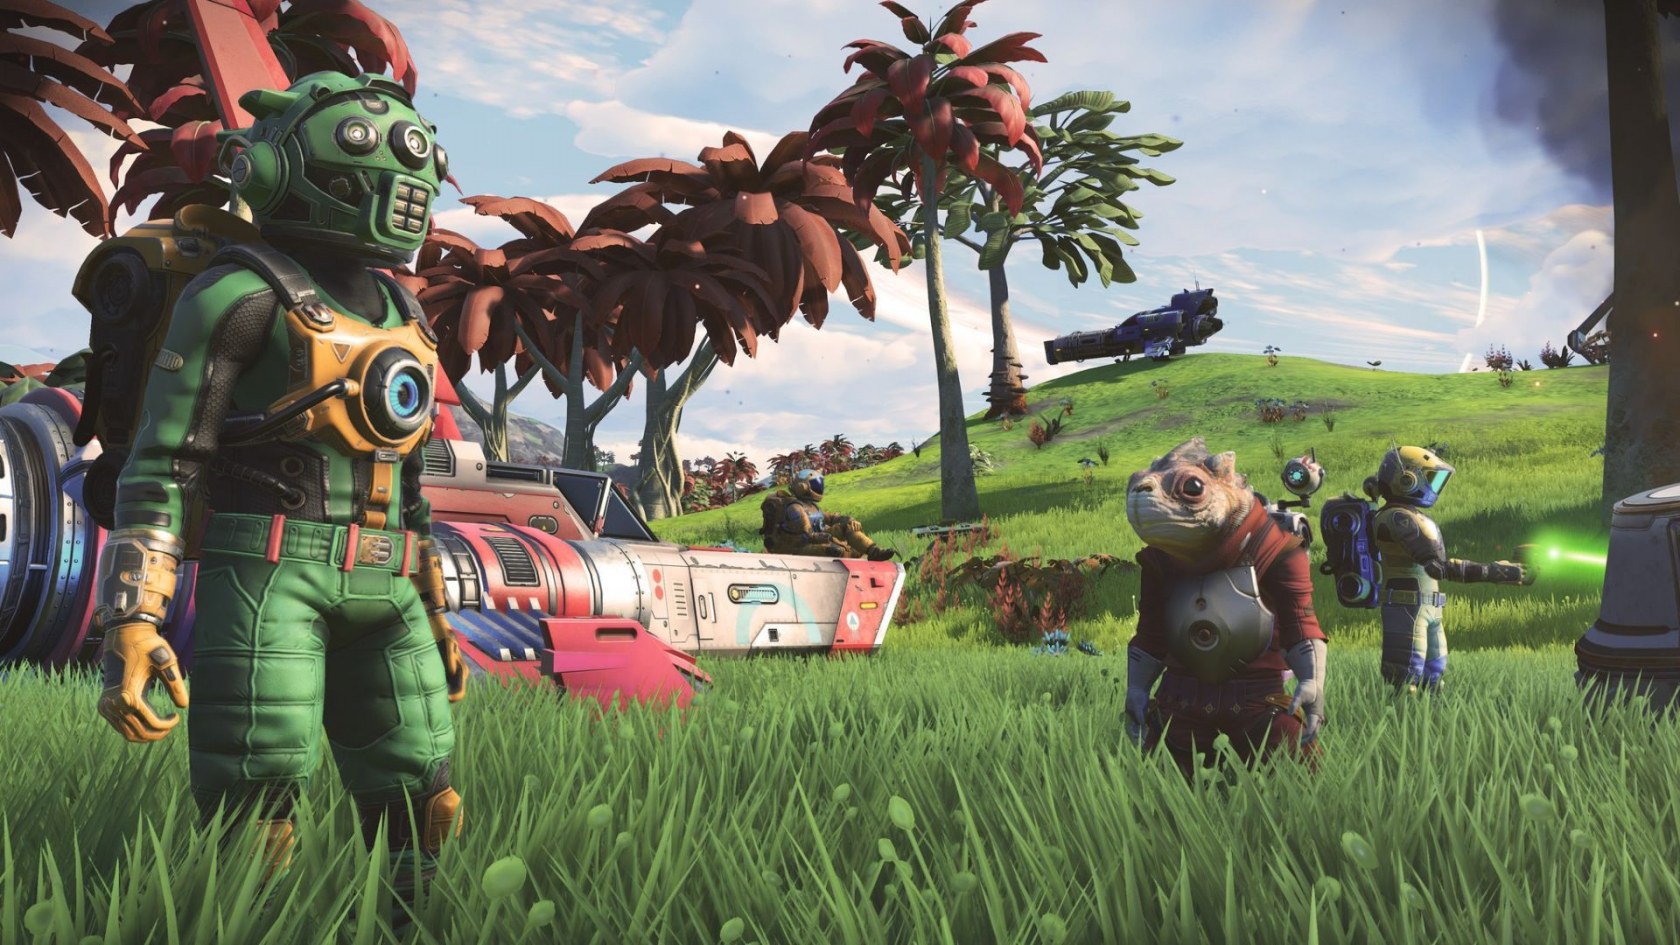 No Man's Sky just had its most successful month since launch; Fortnite revenue growth slows